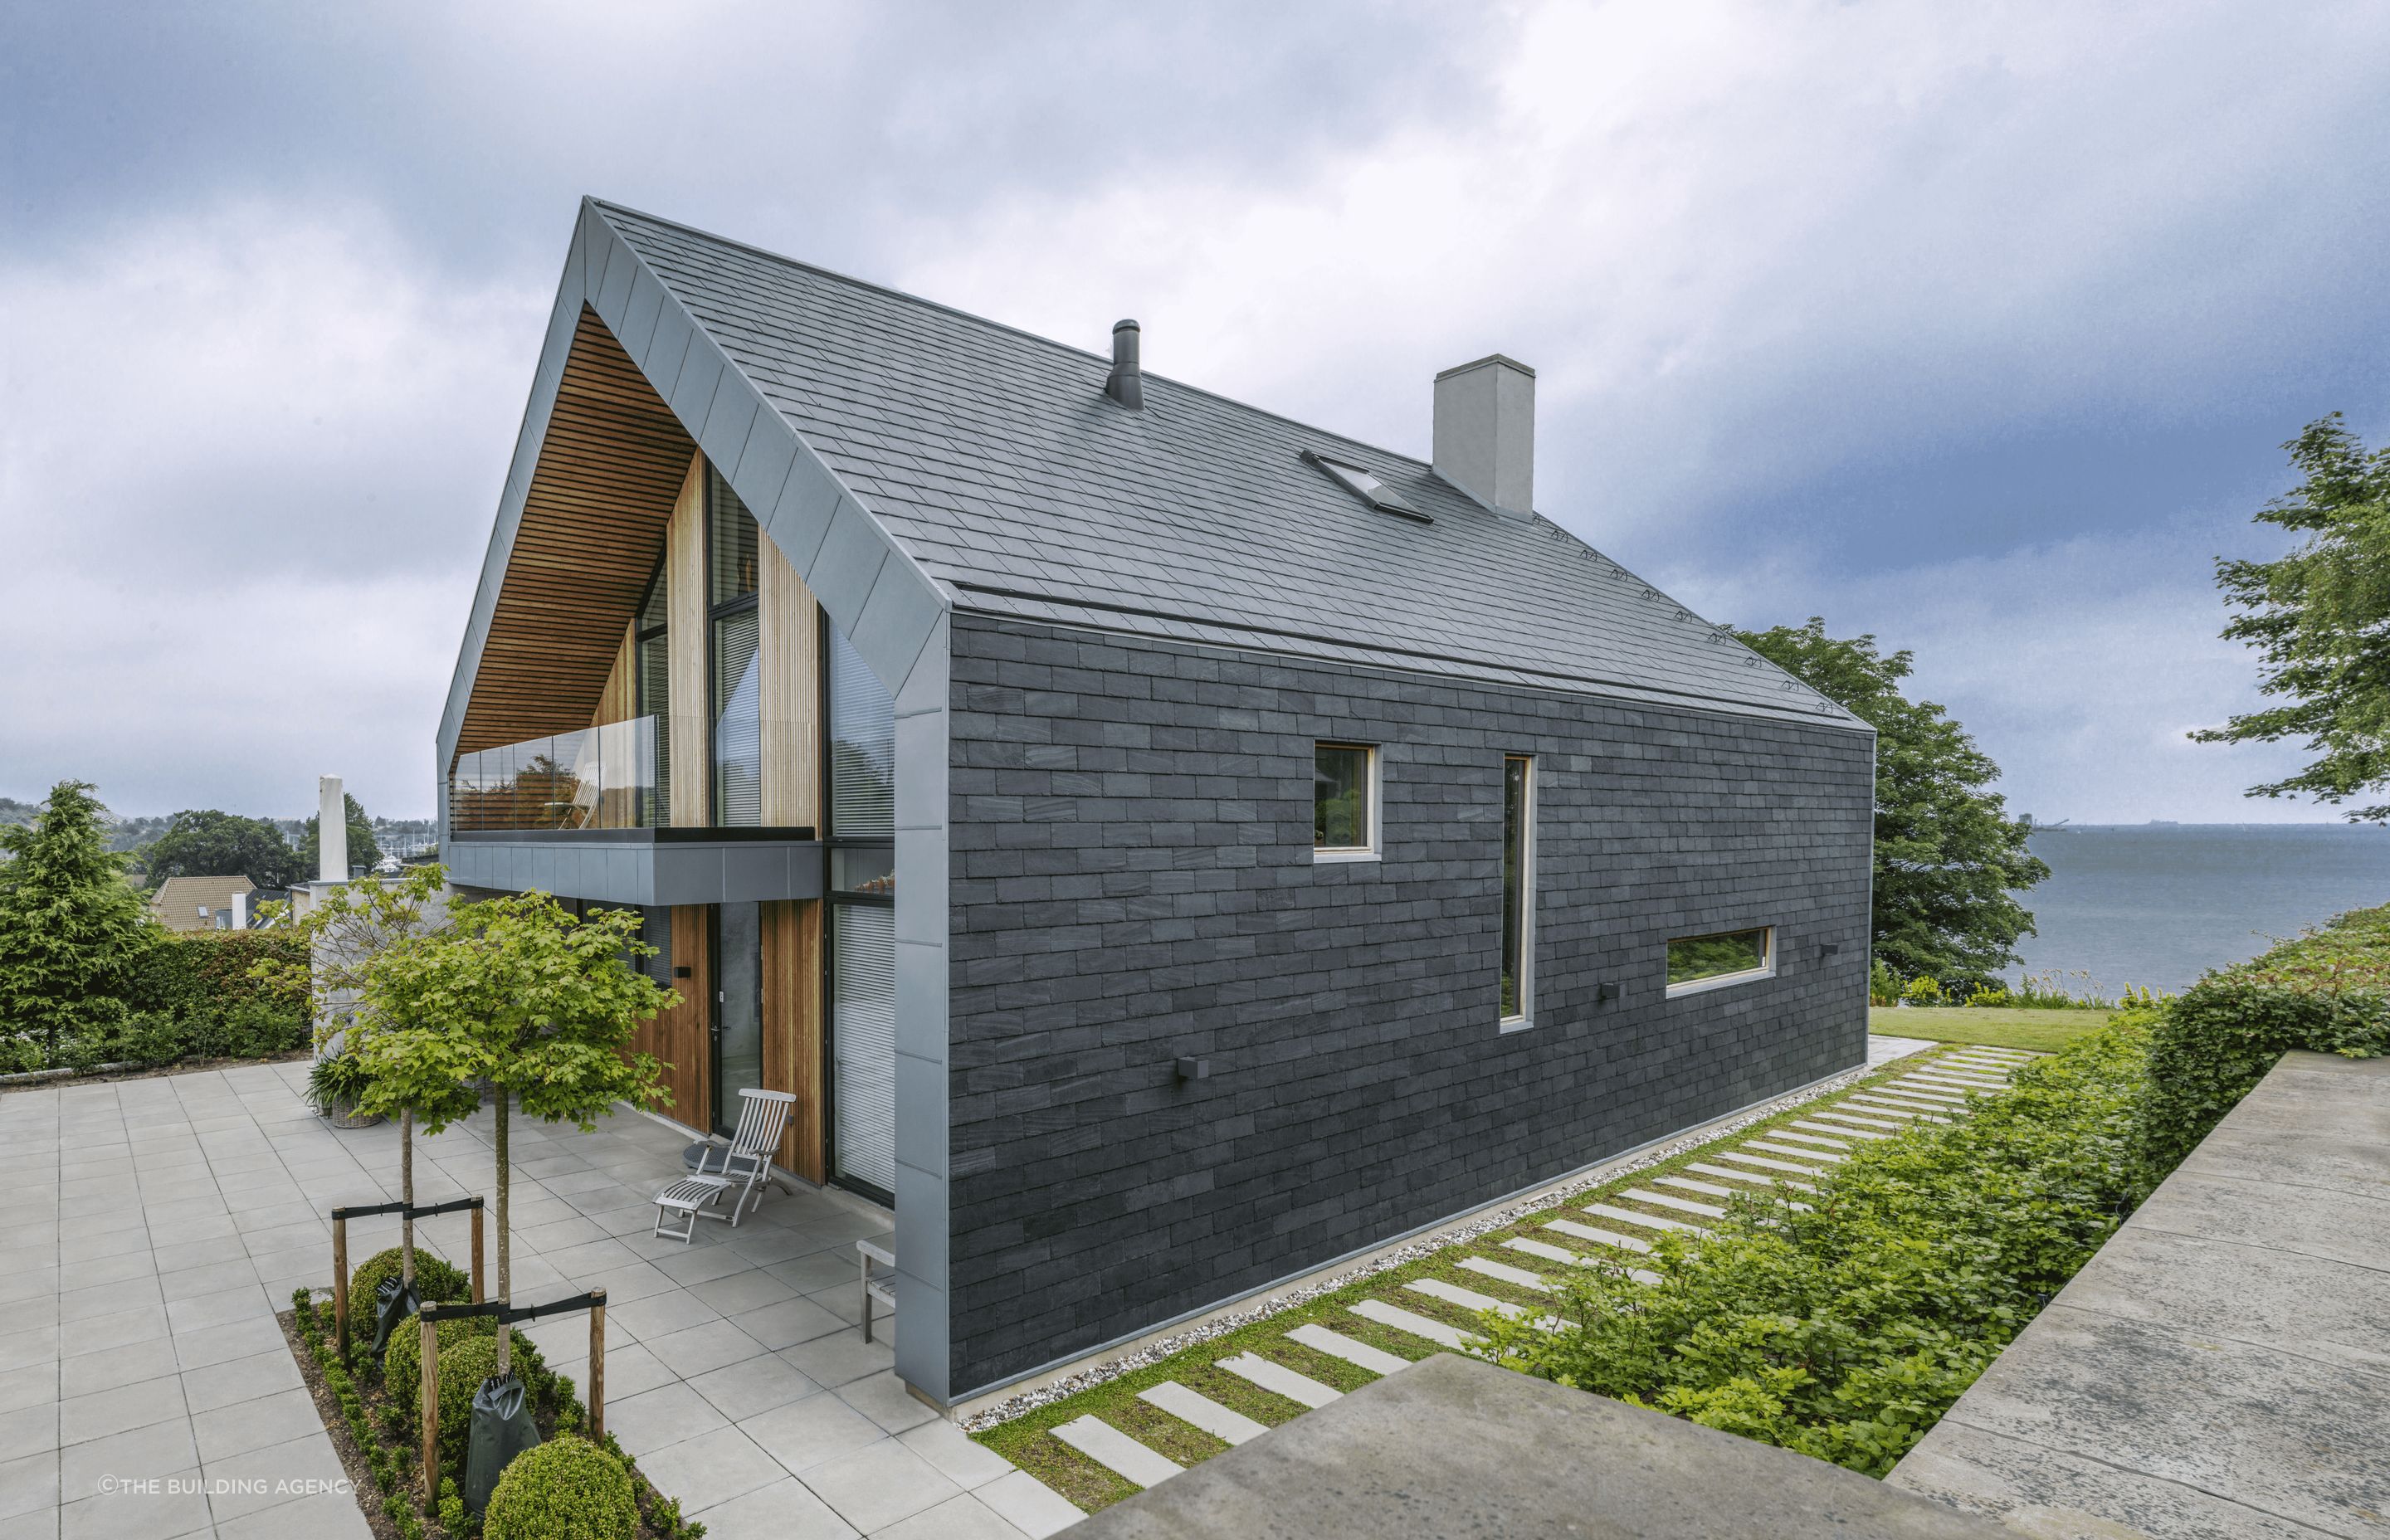 CupaClad natural slate cladding is a contemporary, durable, low-maintenance facade choice for modern homes.